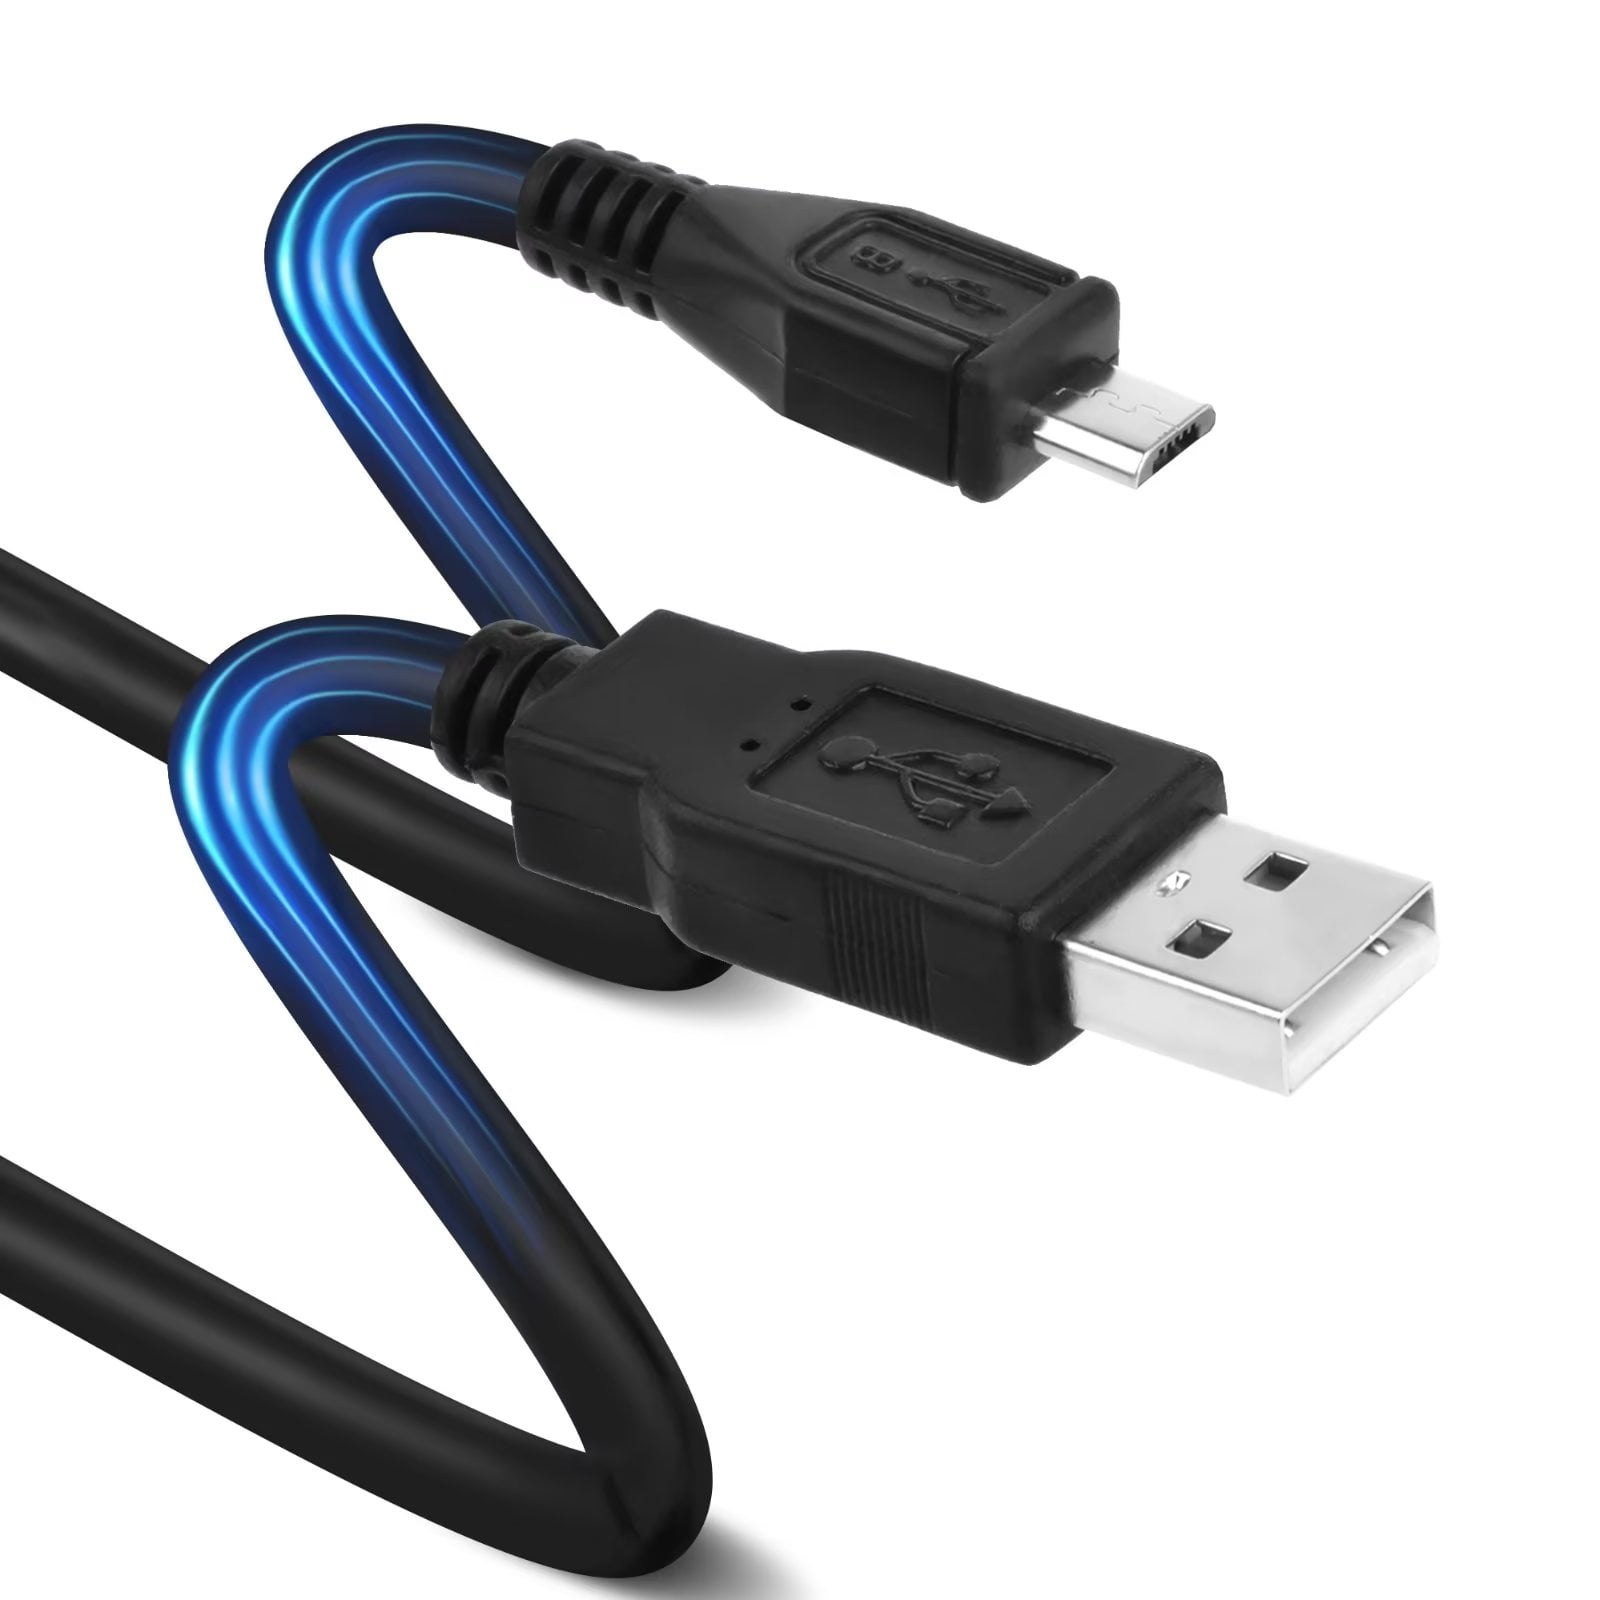 CJP-Geek 5ft USB Cable for Logitech Harmony 650 Remote Control Laptop Power Charger - Walmart.com